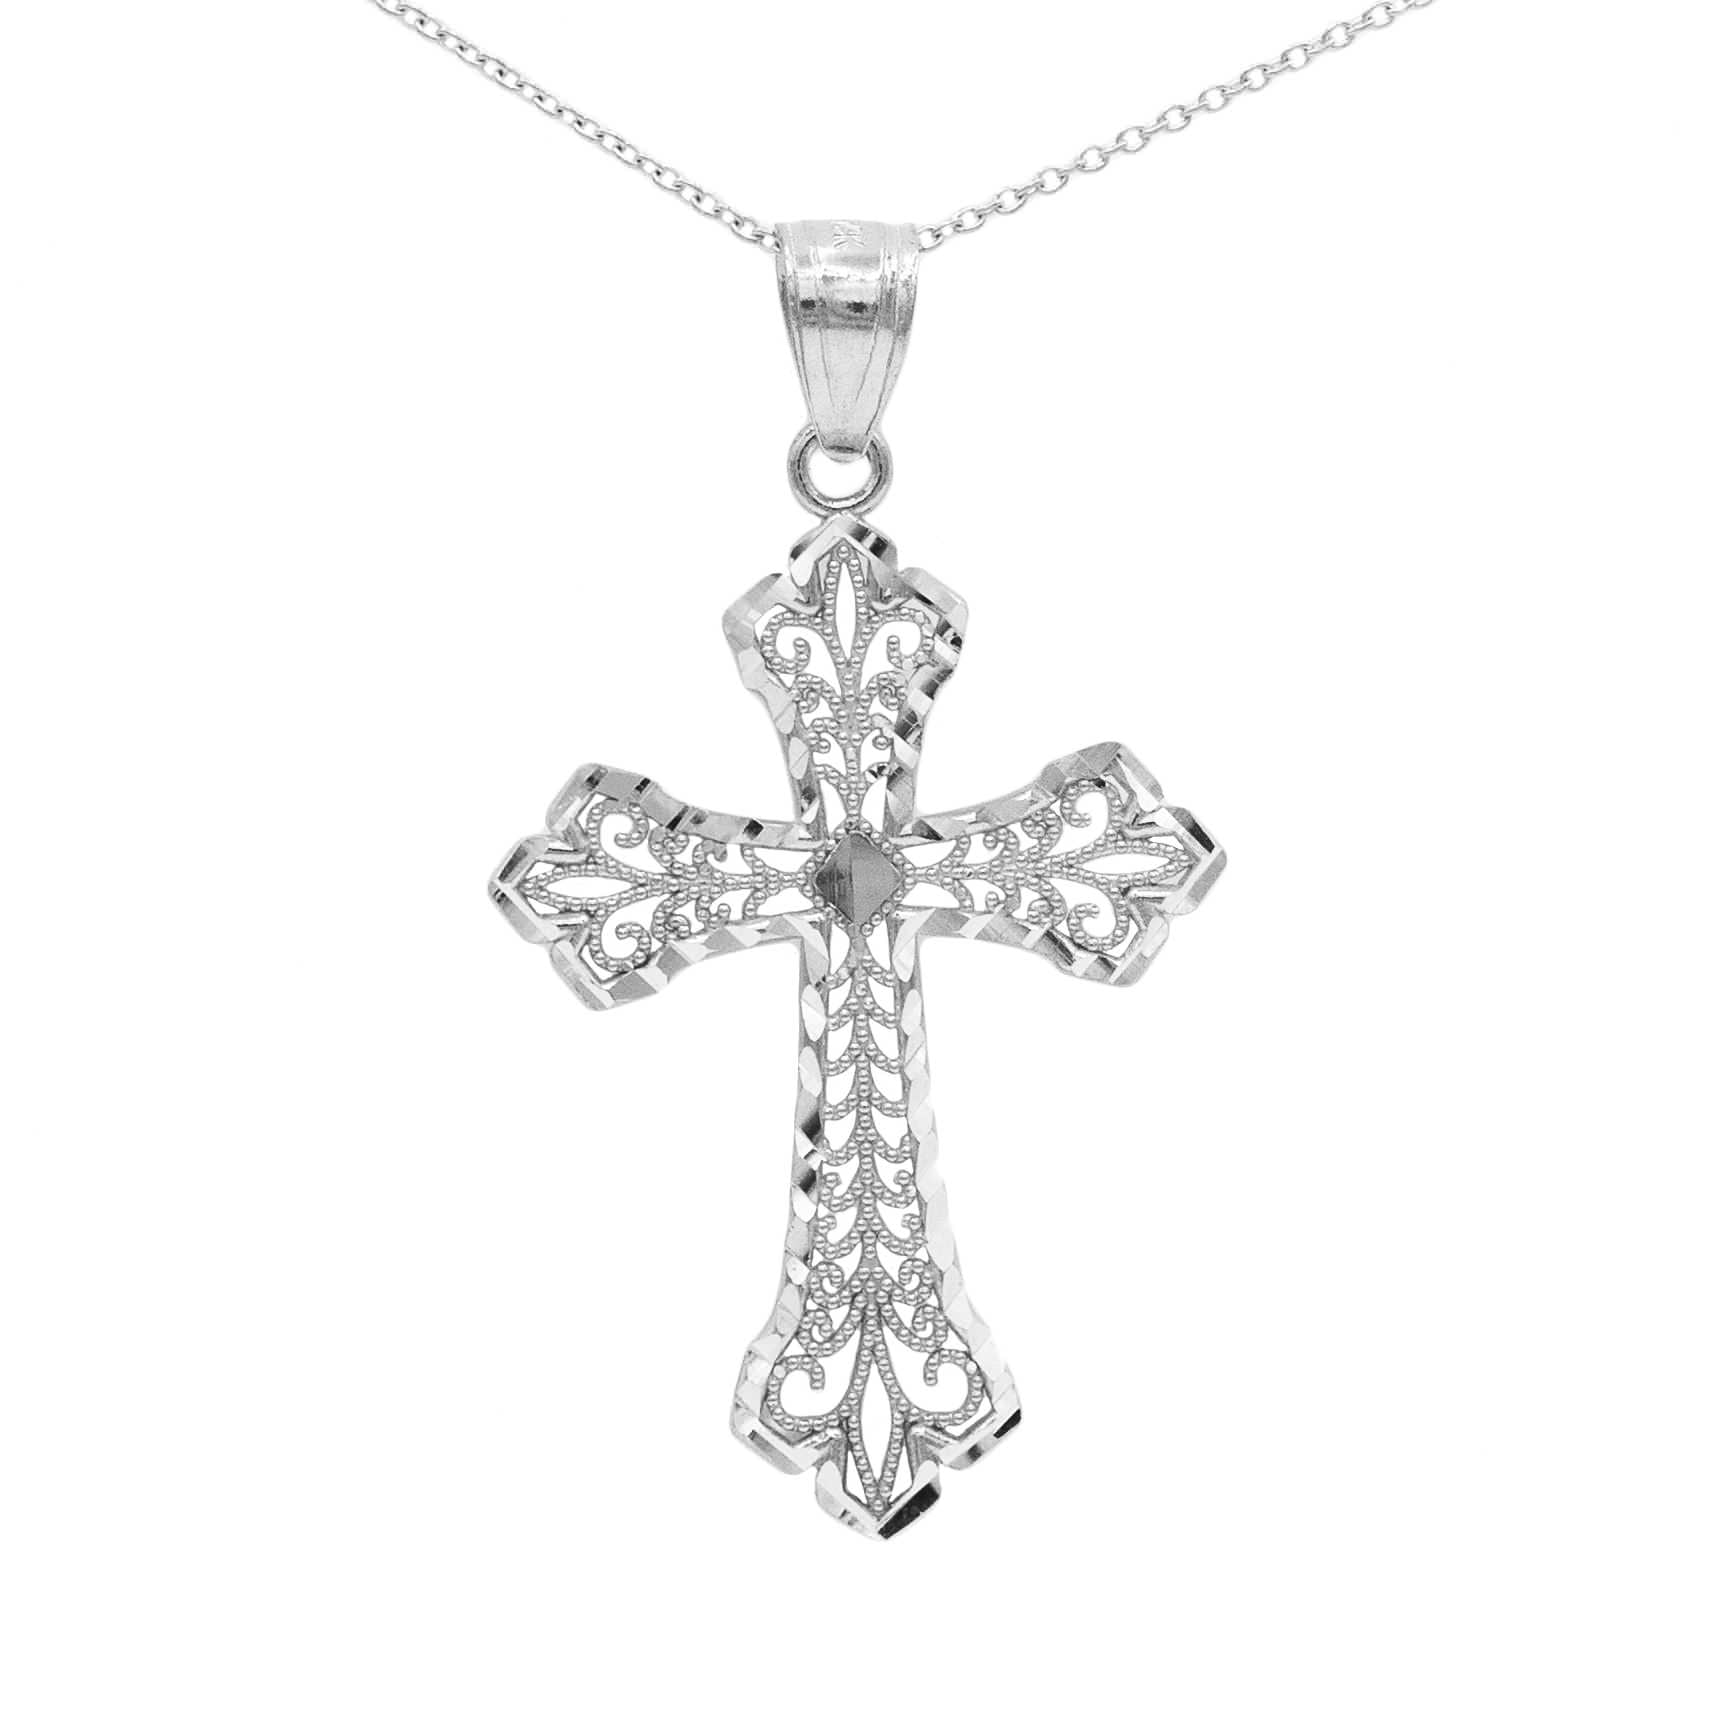 925 Sterling Silver White Cubic Zircon Small Cross Pendant Necklace 18" Chain 